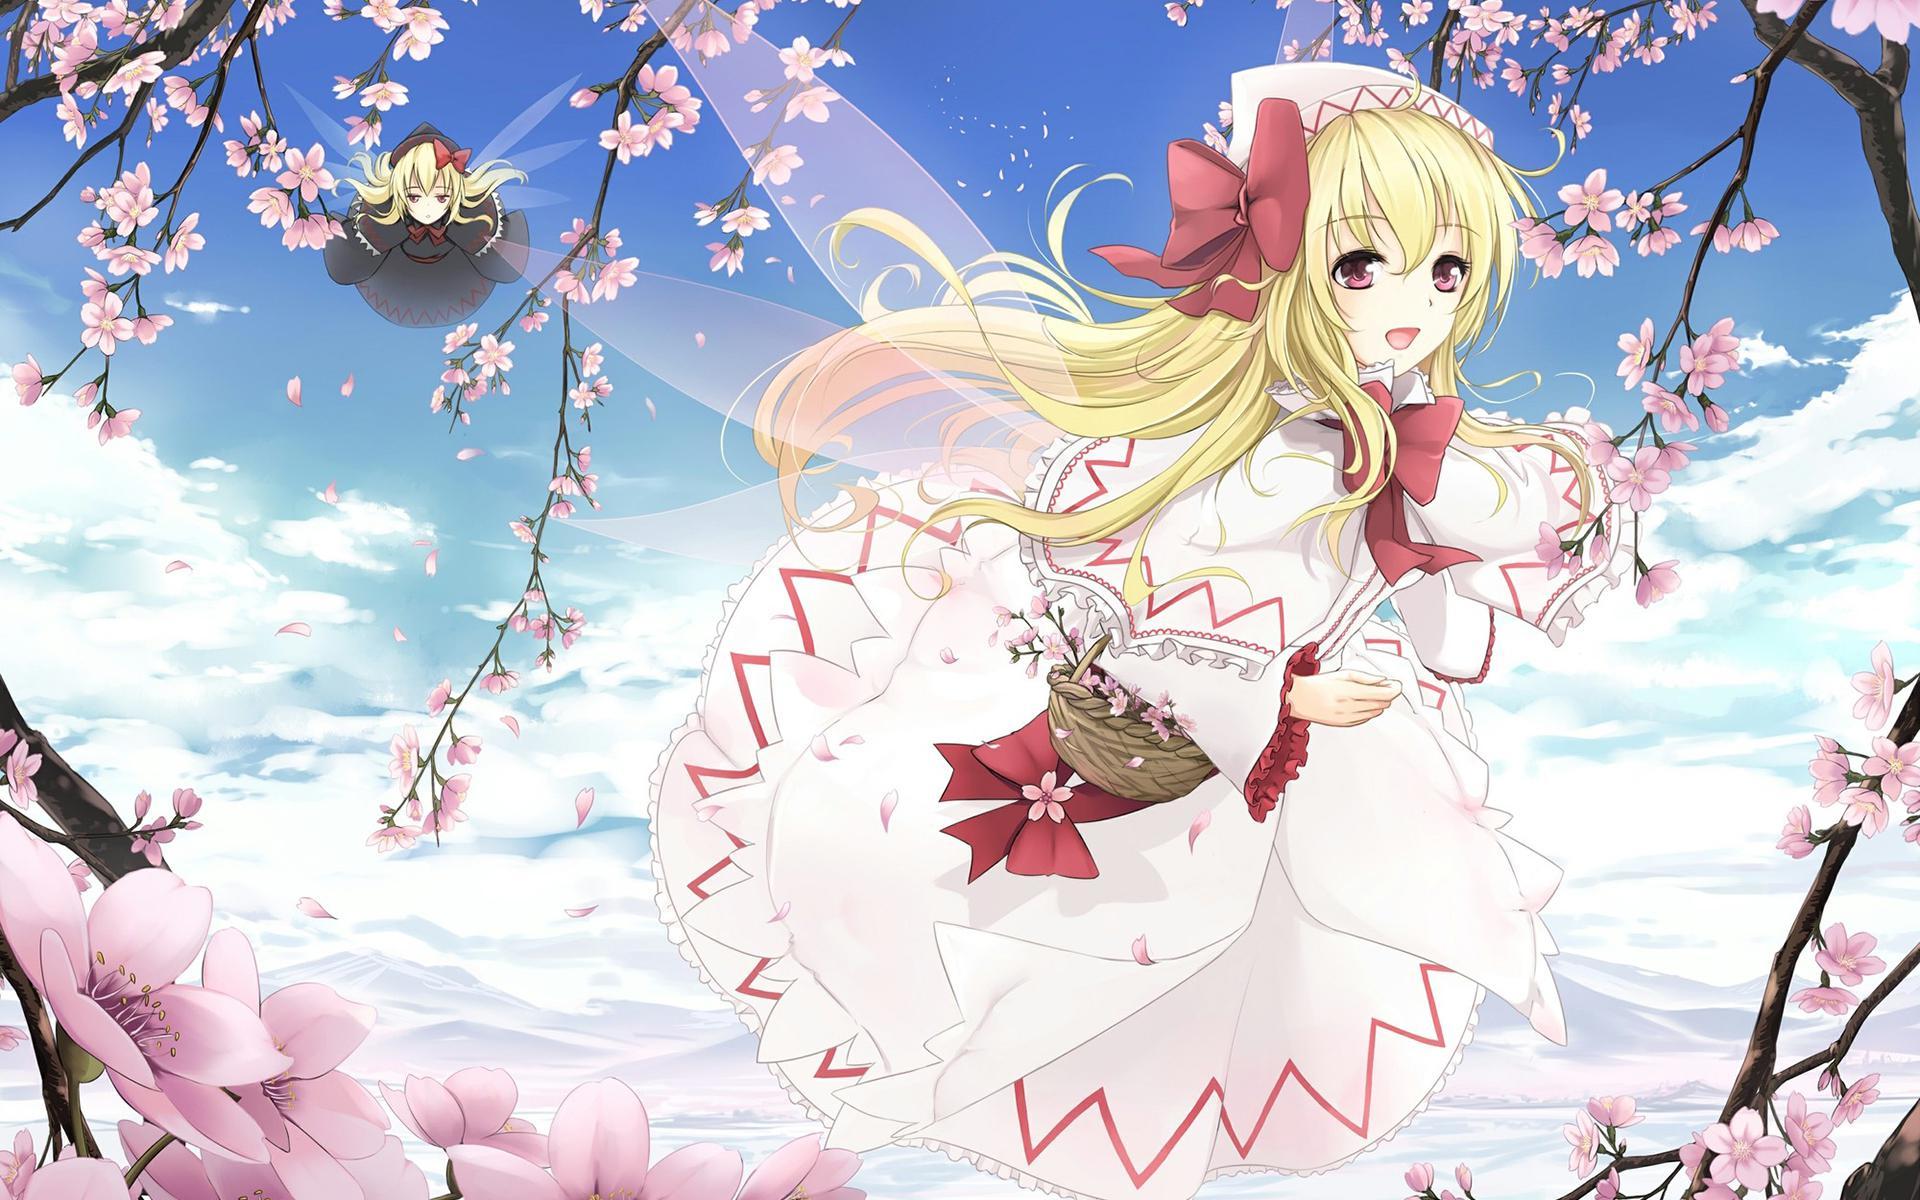 Anime Fairy Wallpapers